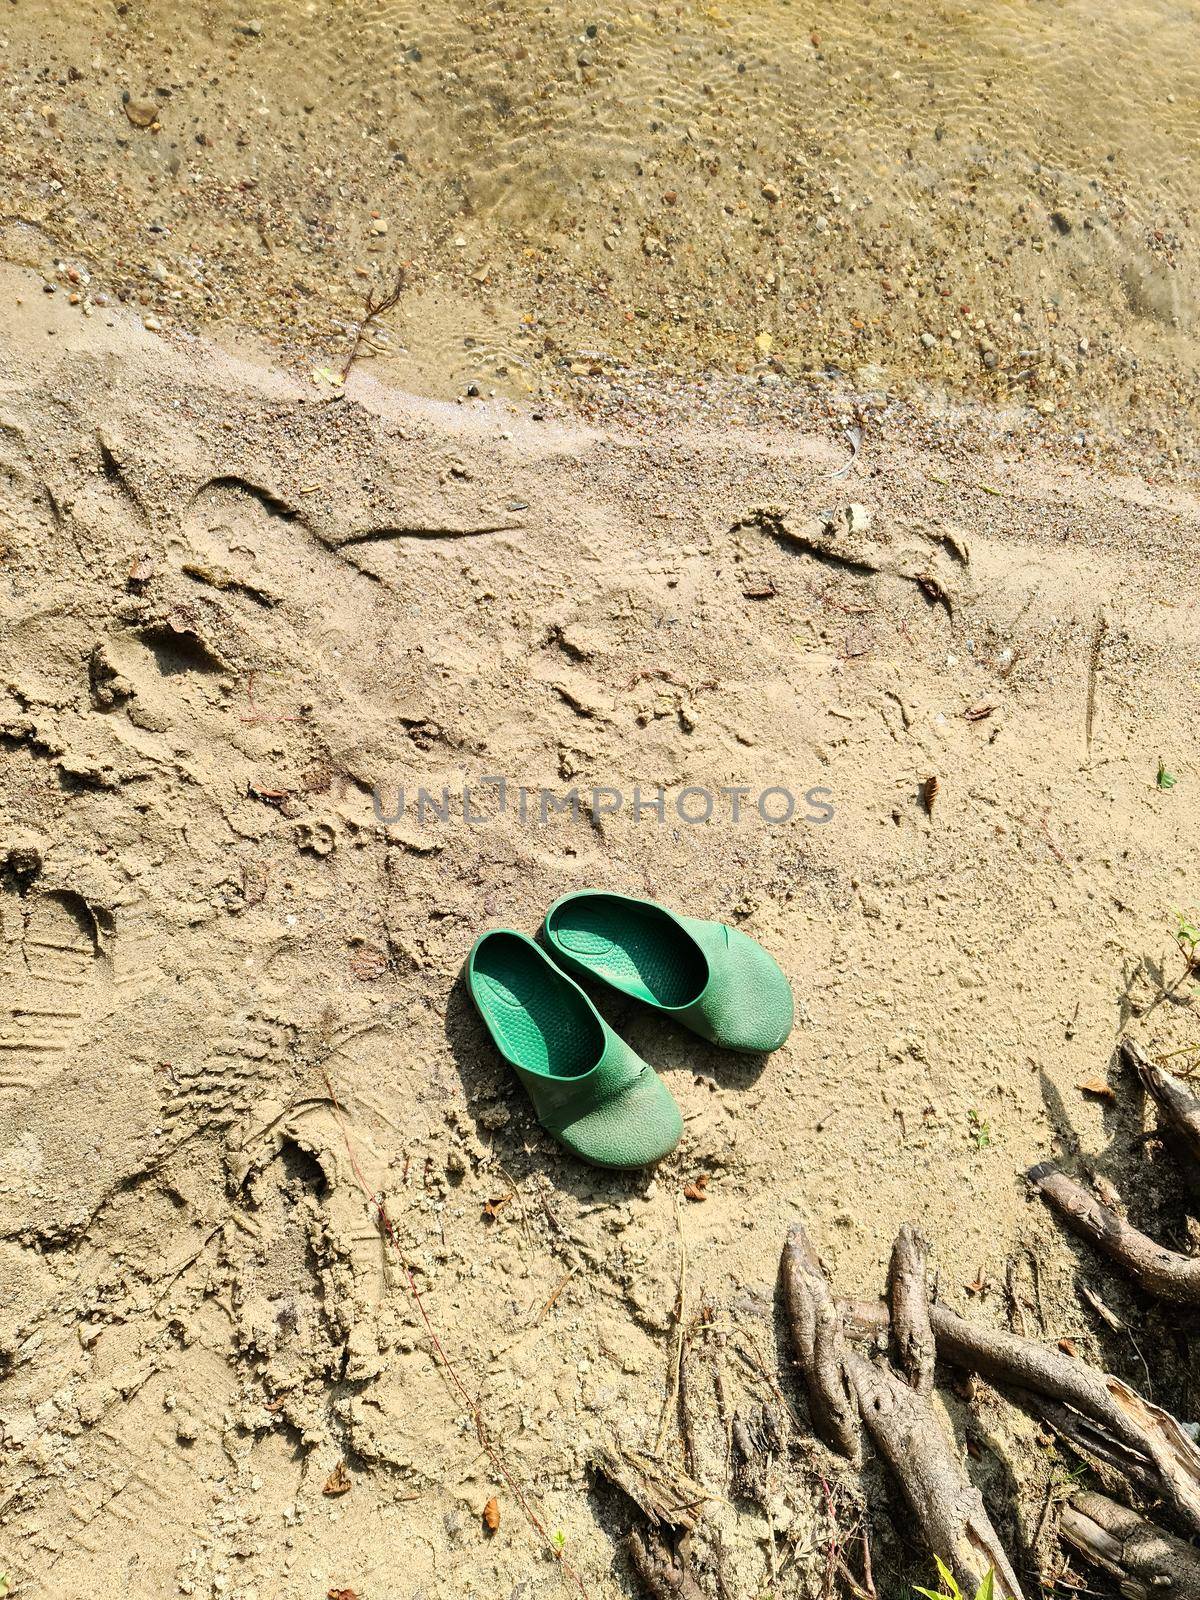 A pair of abandoned flip flops in the sand at a lake by MP_foto71